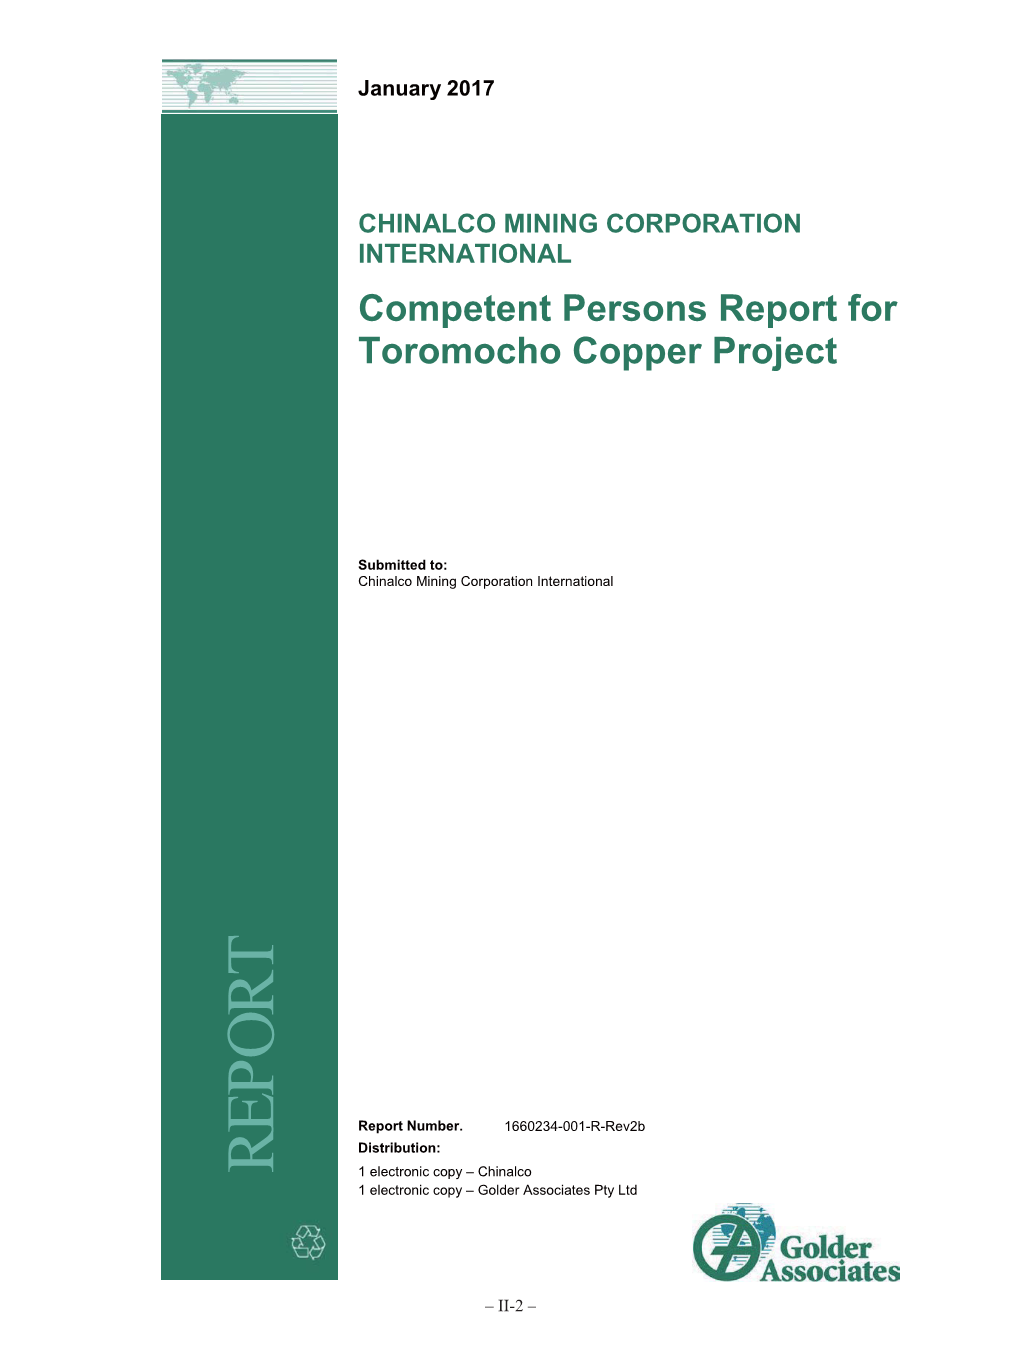 Competent Persons Report for Toromocho Copper Project